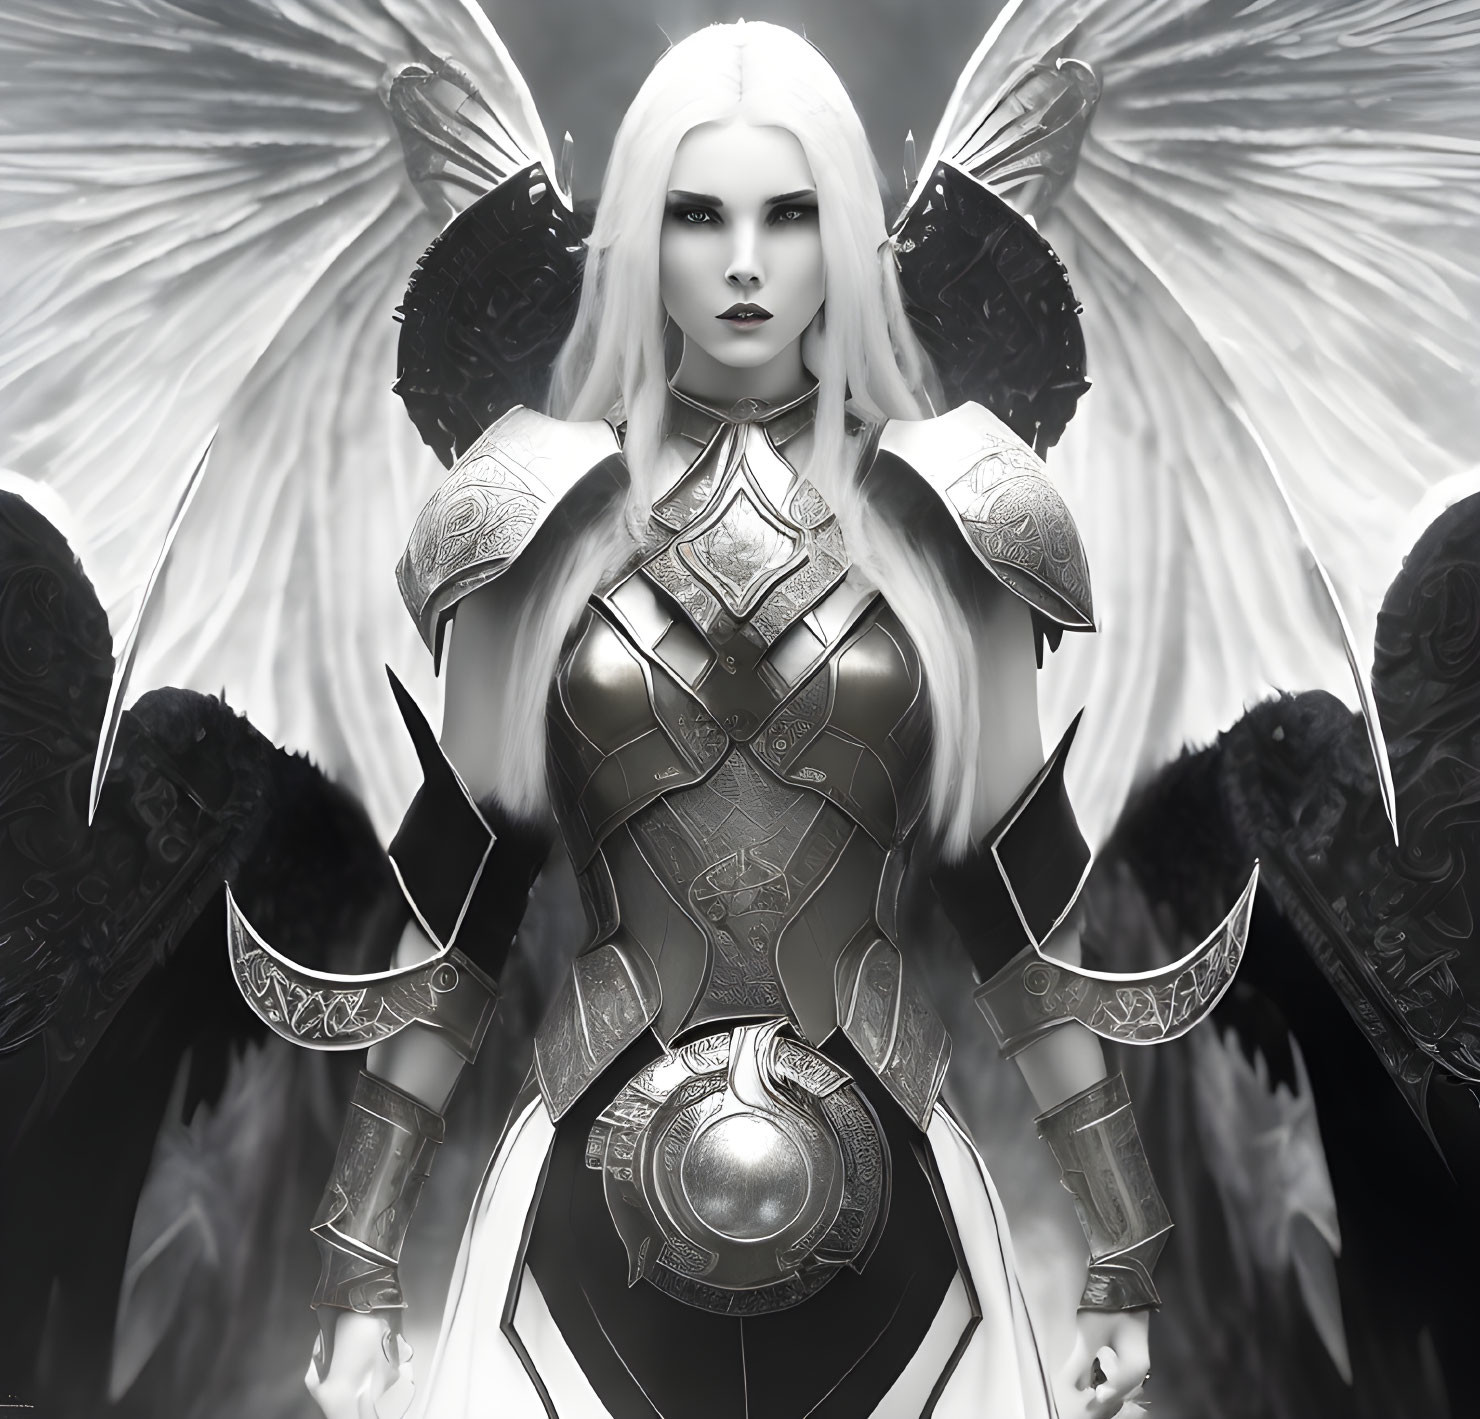 Monochrome fantasy warrior woman with white hair and angelic wings